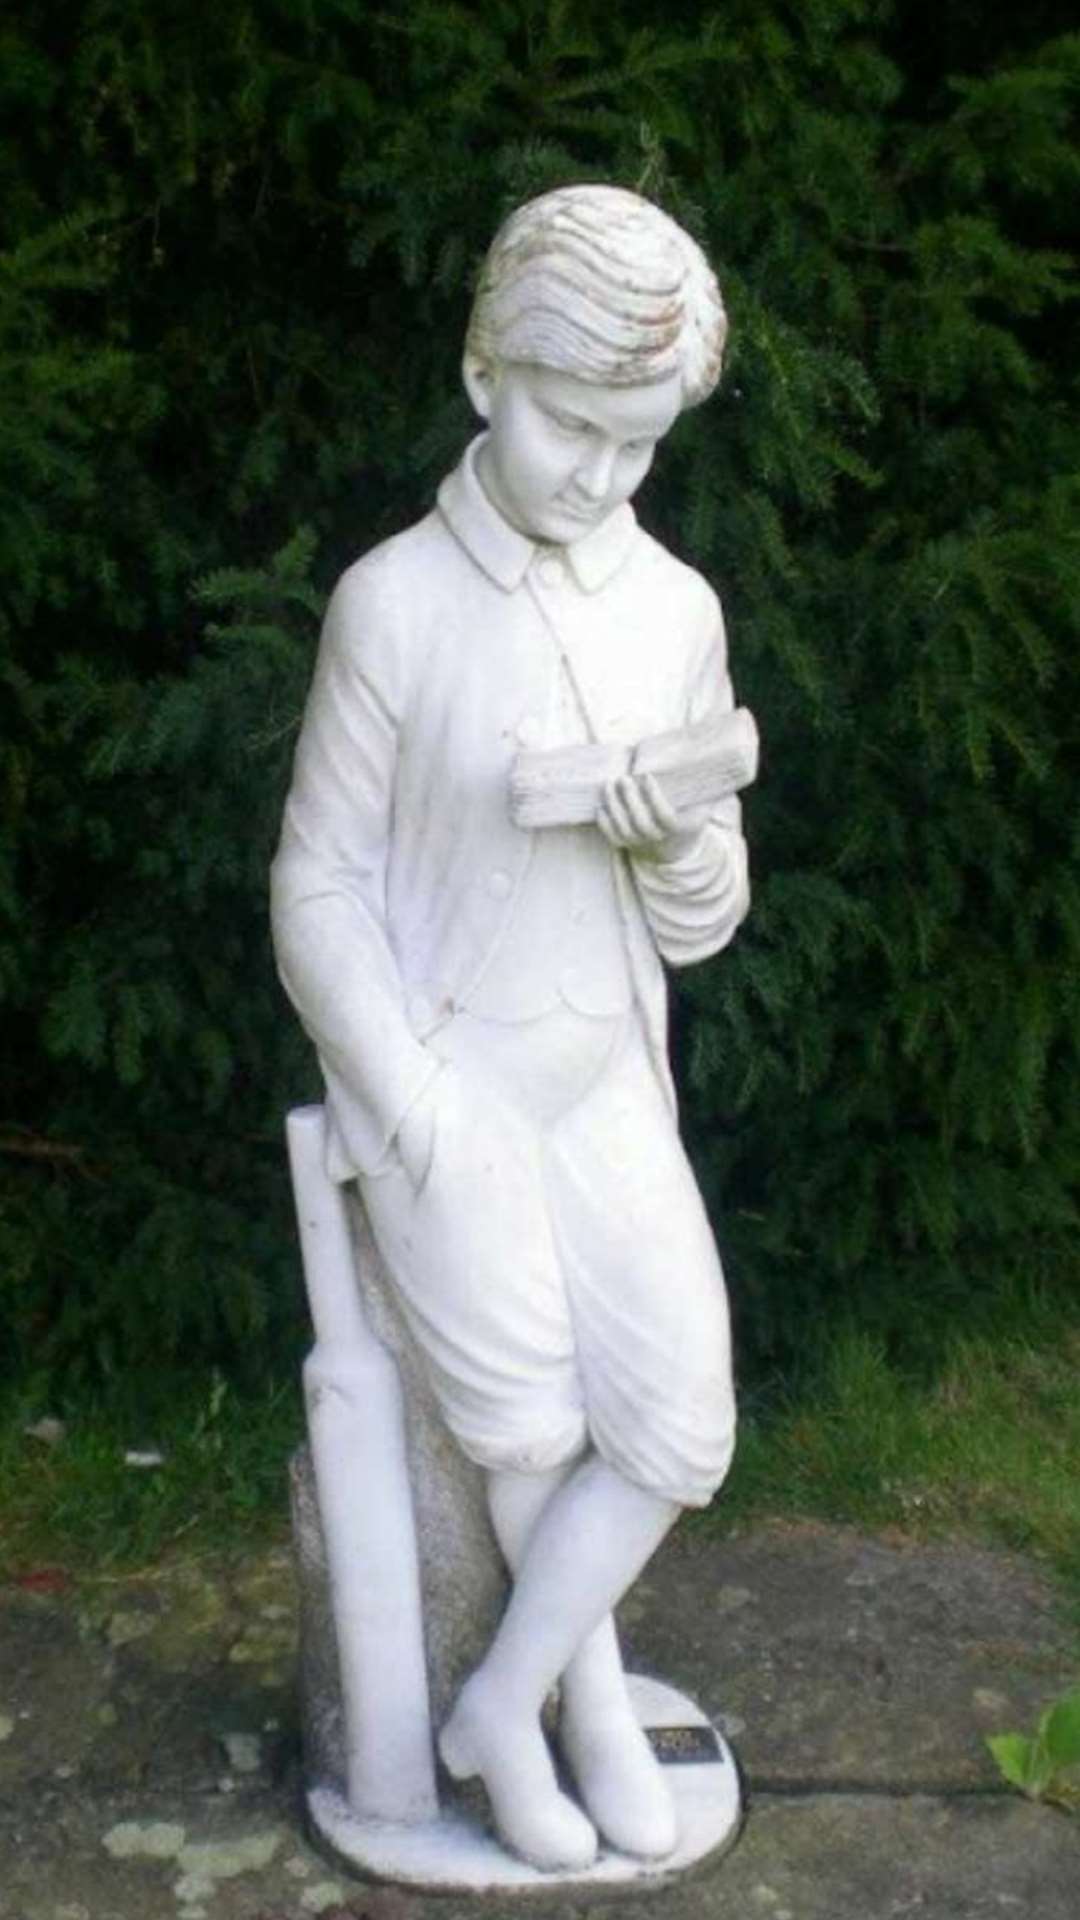 Valuable statue of Lord Byron has been stolen from Godmersham